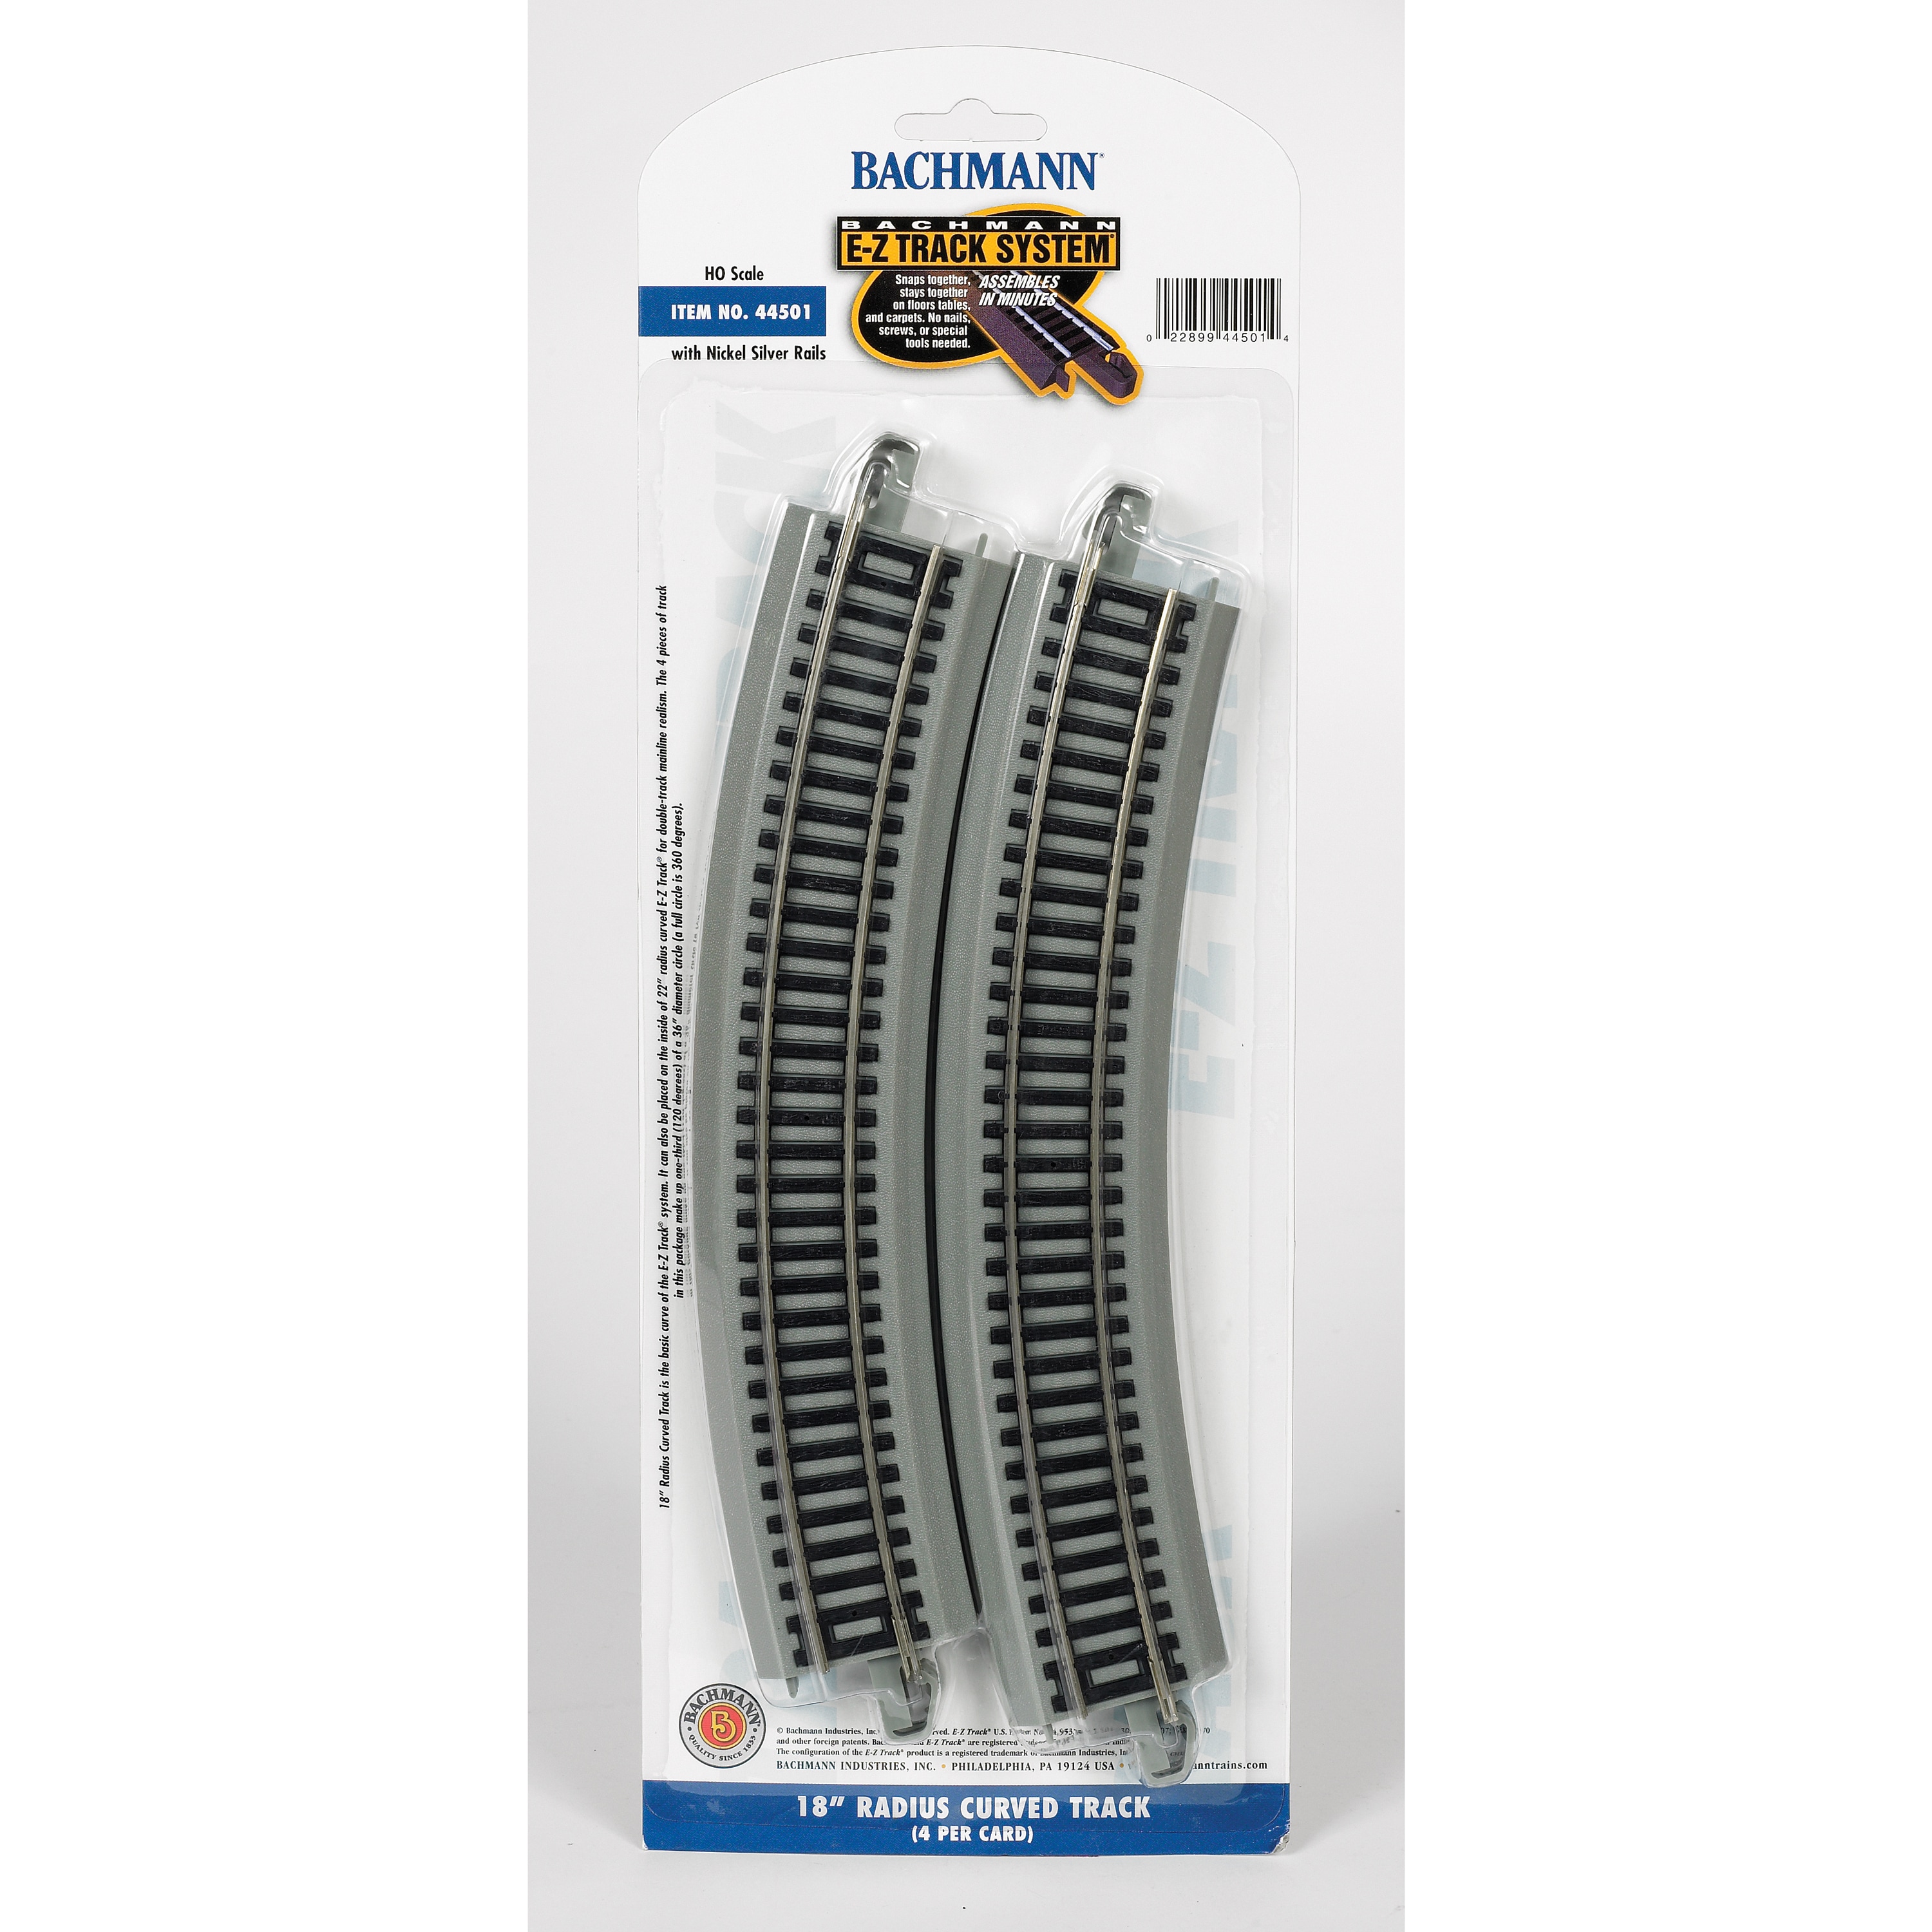 Bachmann Trains HO Scale 18" Radius Curved Nickel Silver E-Z Track - 4 Pack - image 2 of 2